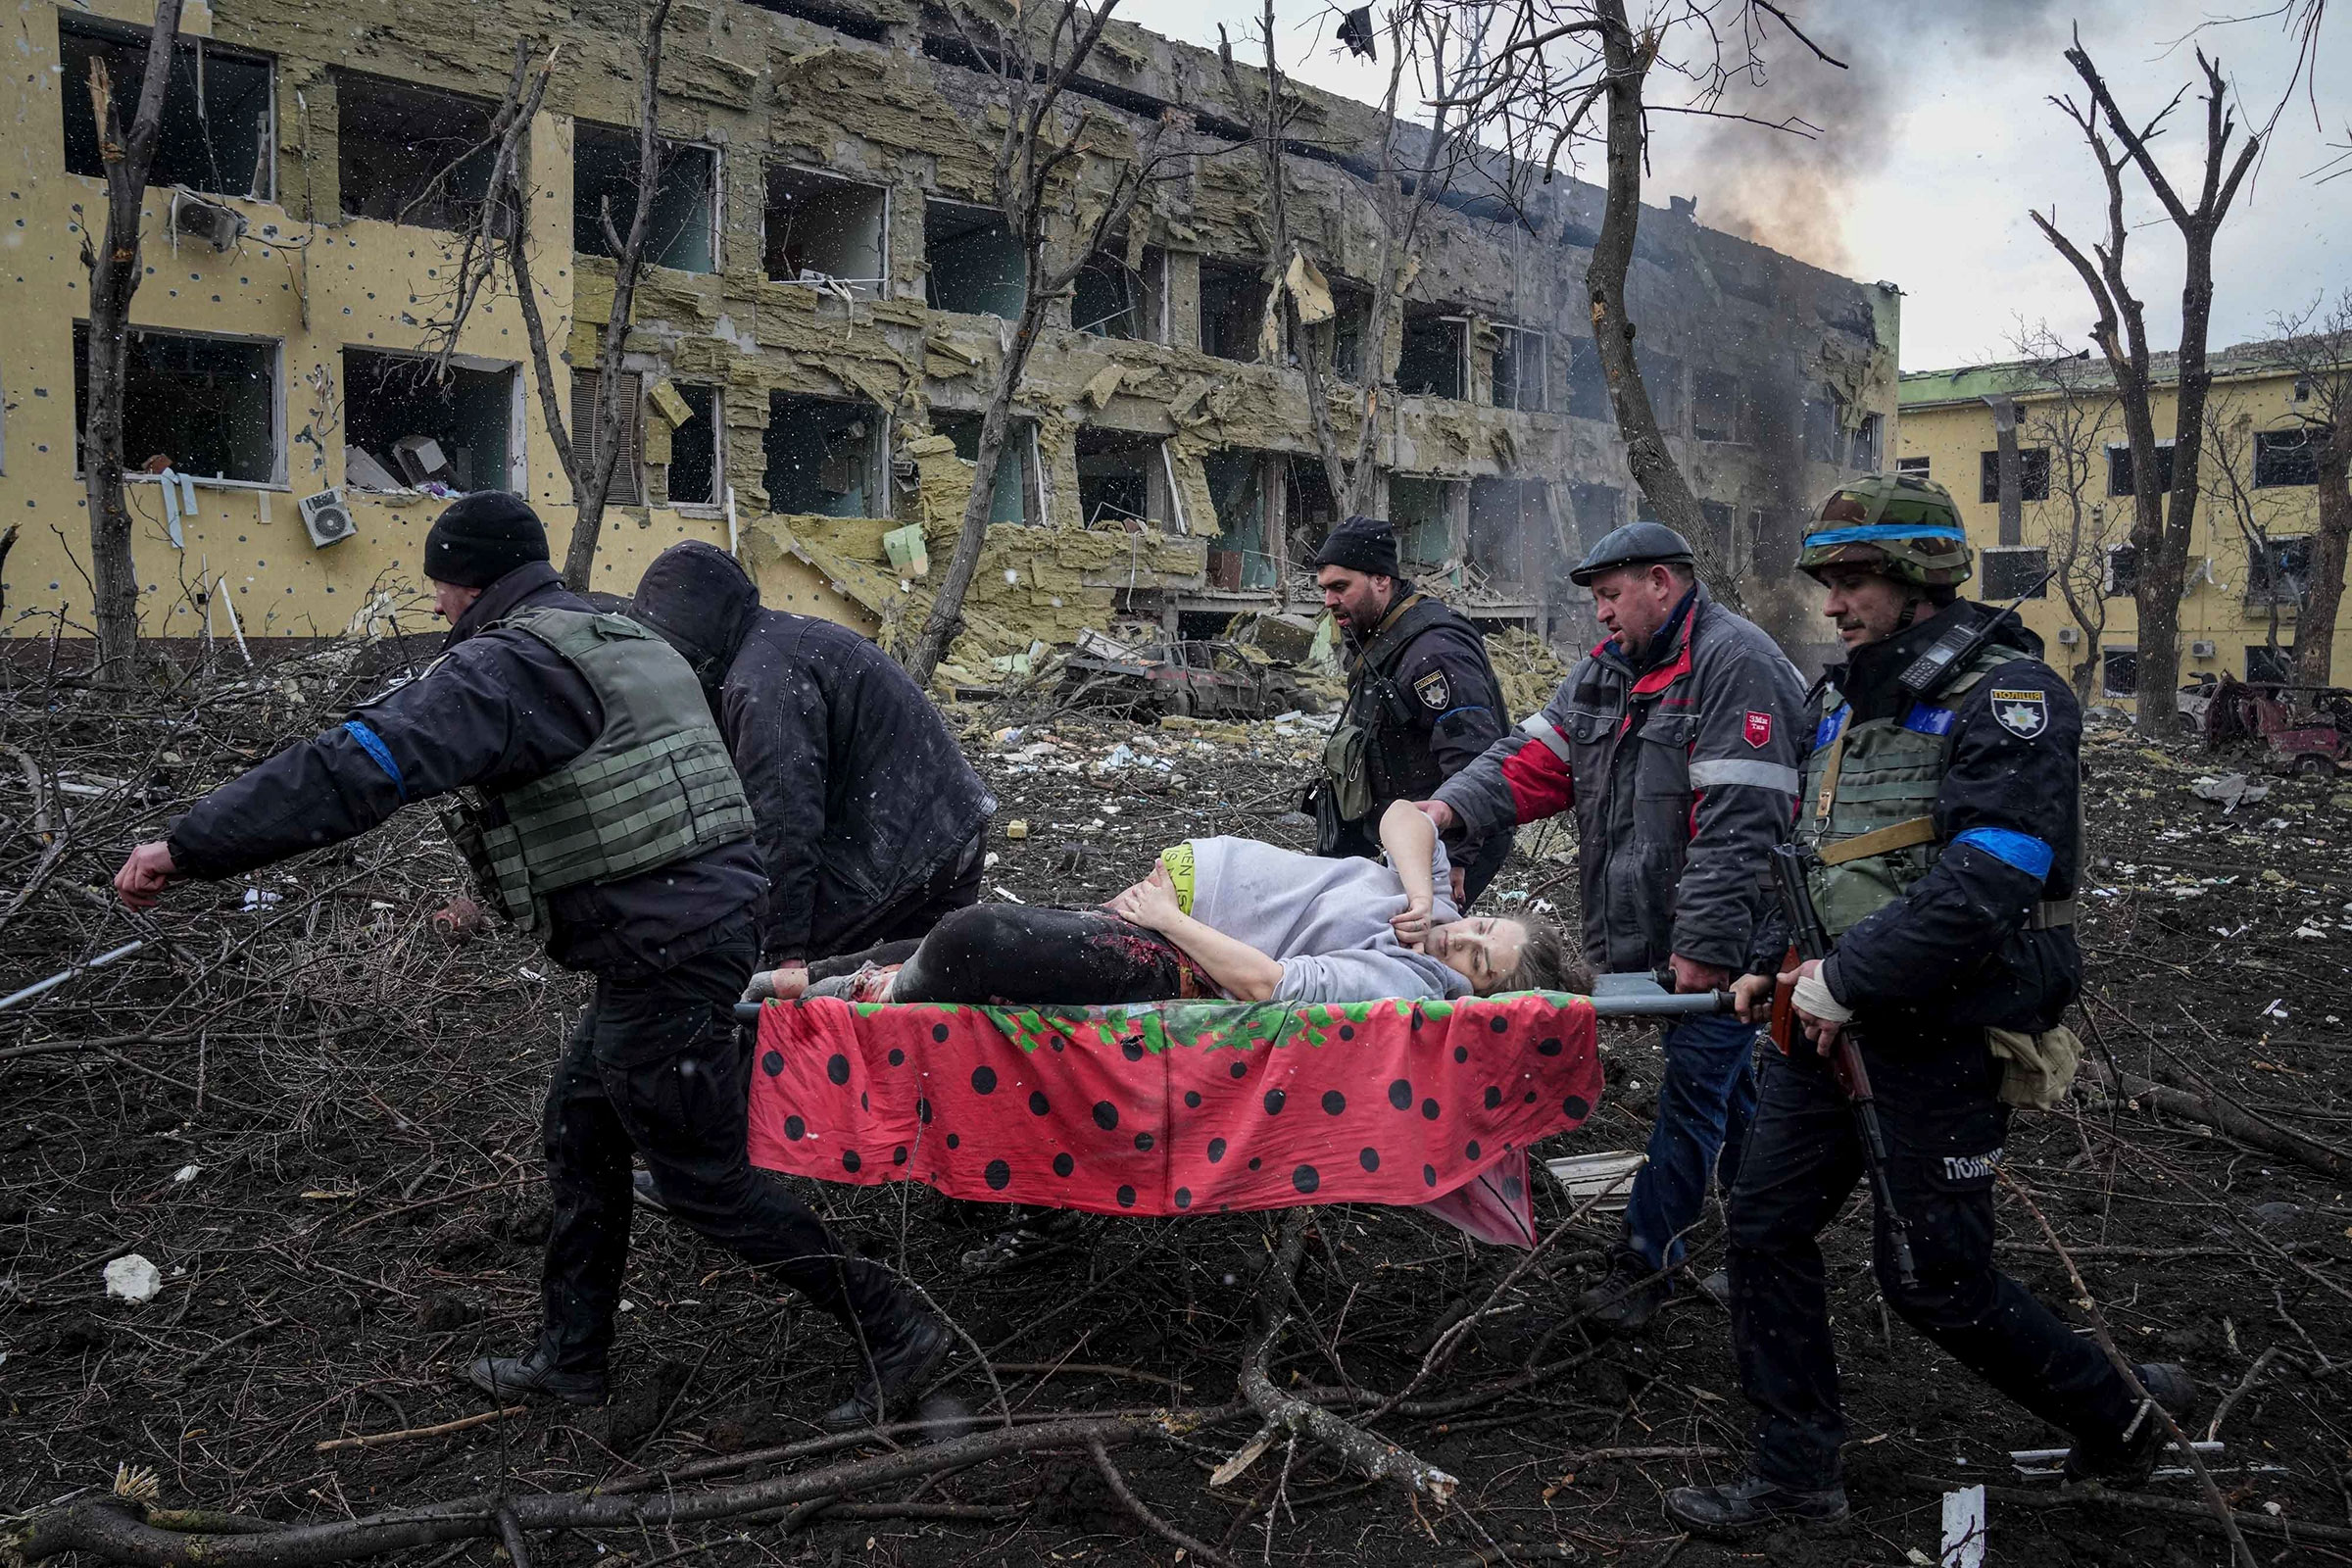 Ukrainian emergency employees and volunteers carry an injured pregnant woman from a maternity hospital damaged by shelling in Mariupol on March 9. The baby was born dead. Half an hour later, the mother died too. (Evgeniy Maloletka—AP)